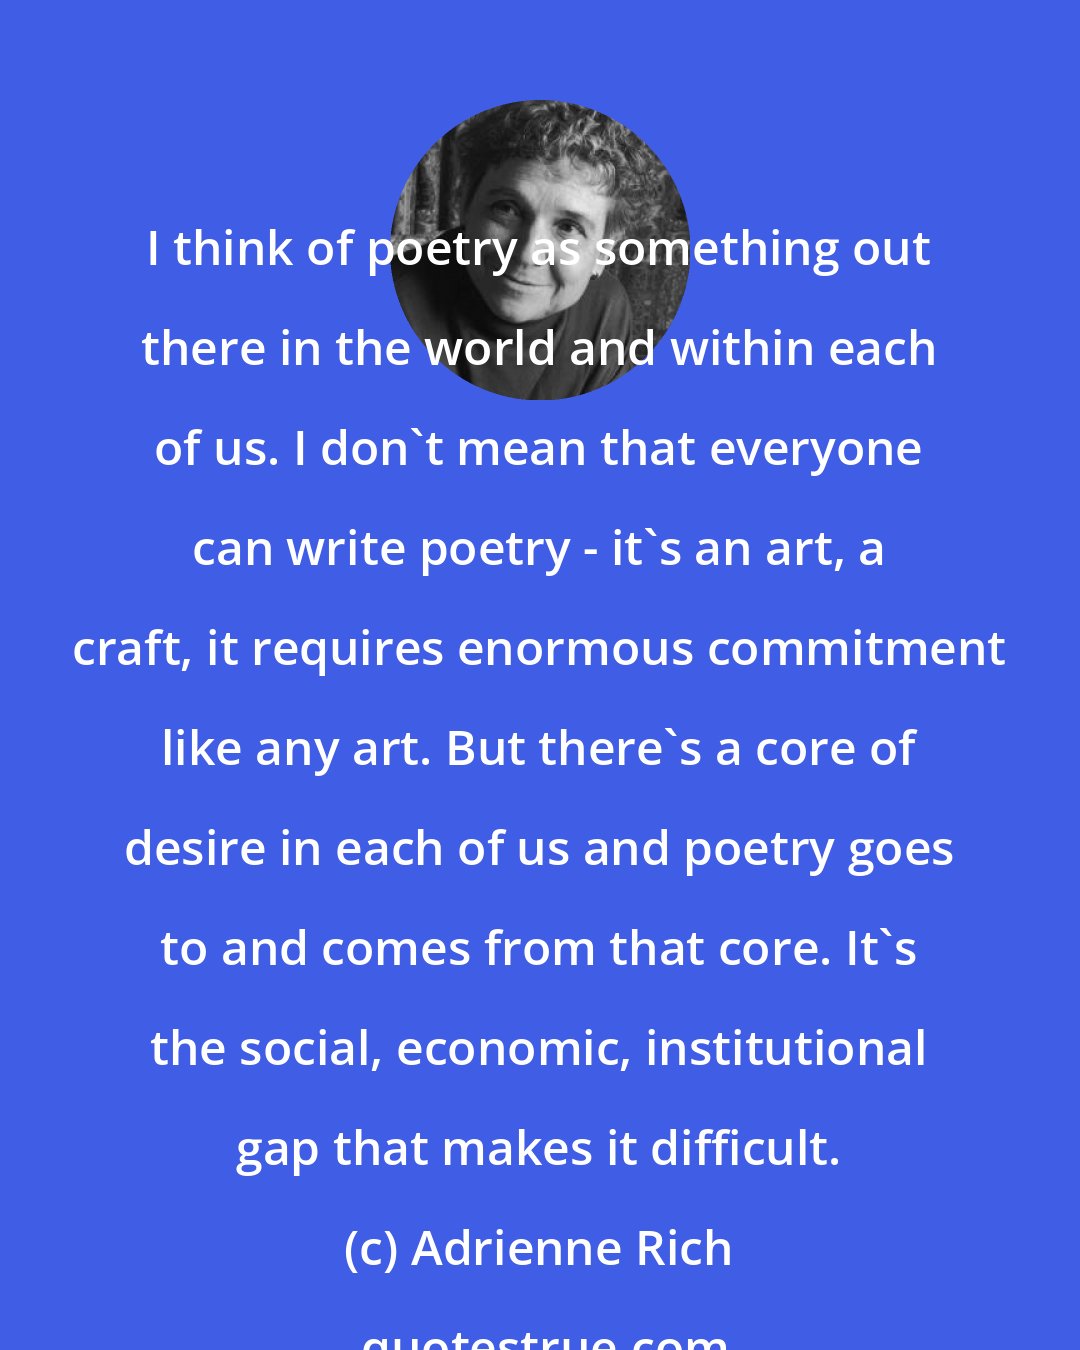 Adrienne Rich: I think of poetry as something out there in the world and within each of us. I don't mean that everyone can write poetry - it's an art, a craft, it requires enormous commitment like any art. But there's a core of desire in each of us and poetry goes to and comes from that core. It's the social, economic, institutional gap that makes it difficult.